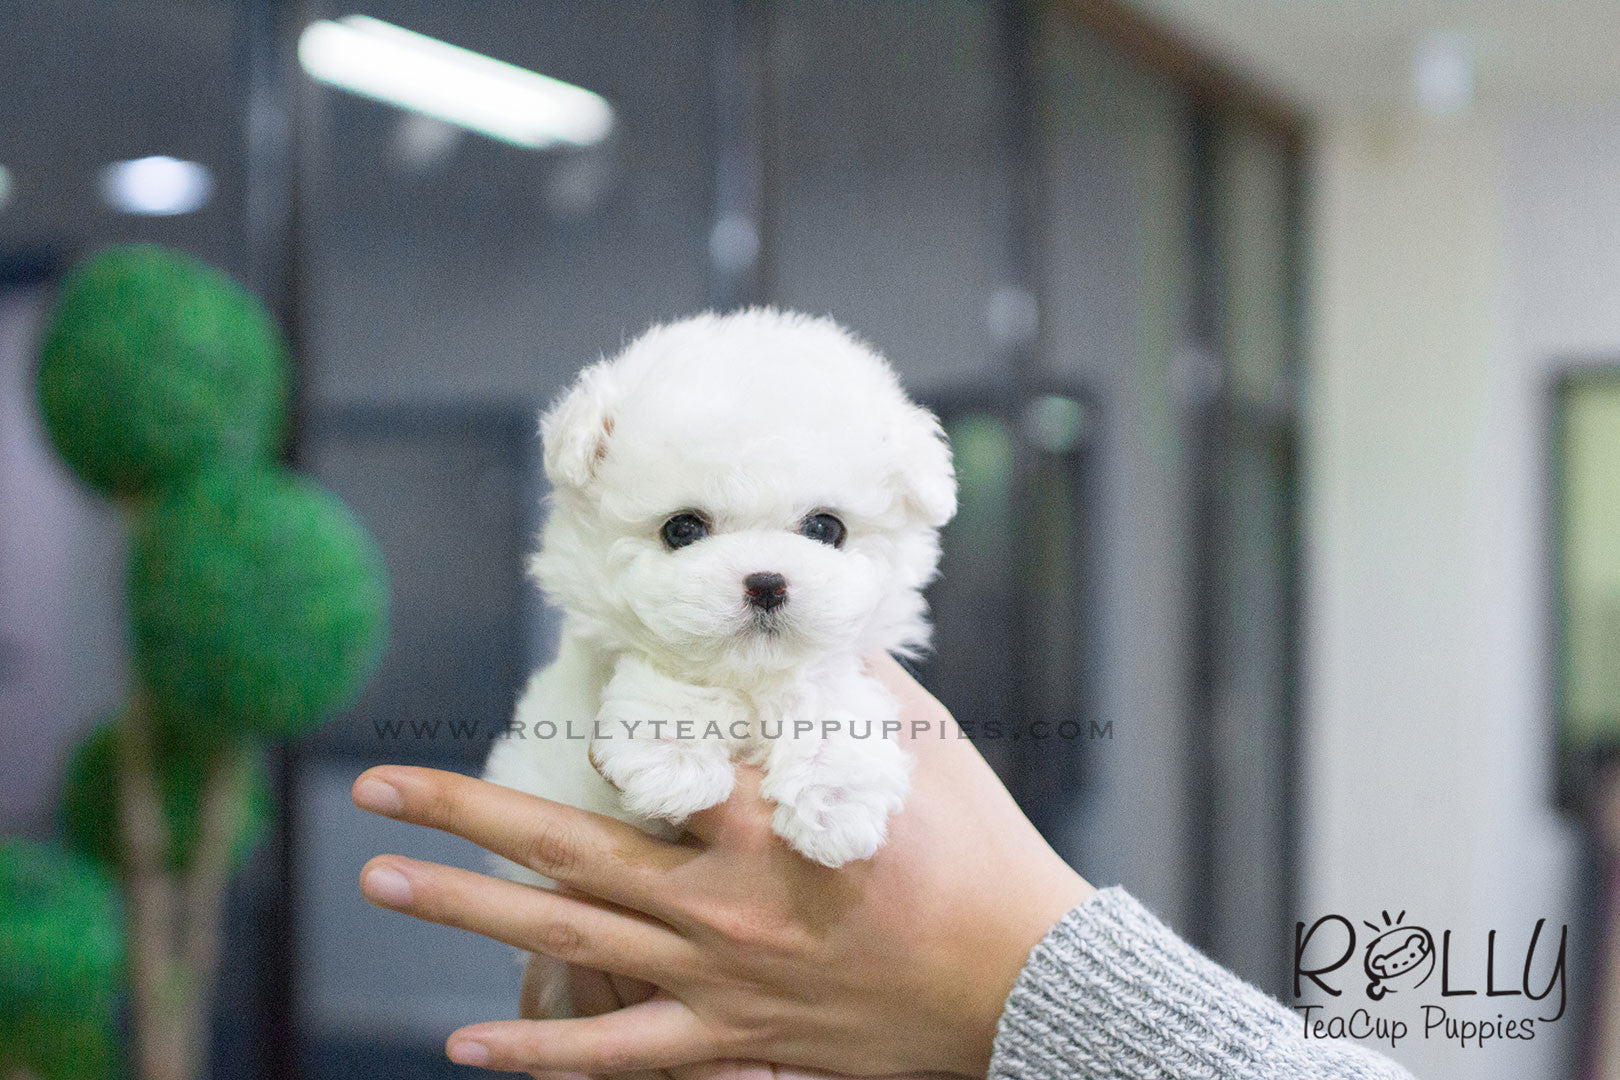 Molly - Bichon. F- Rolly Teacup Puppies